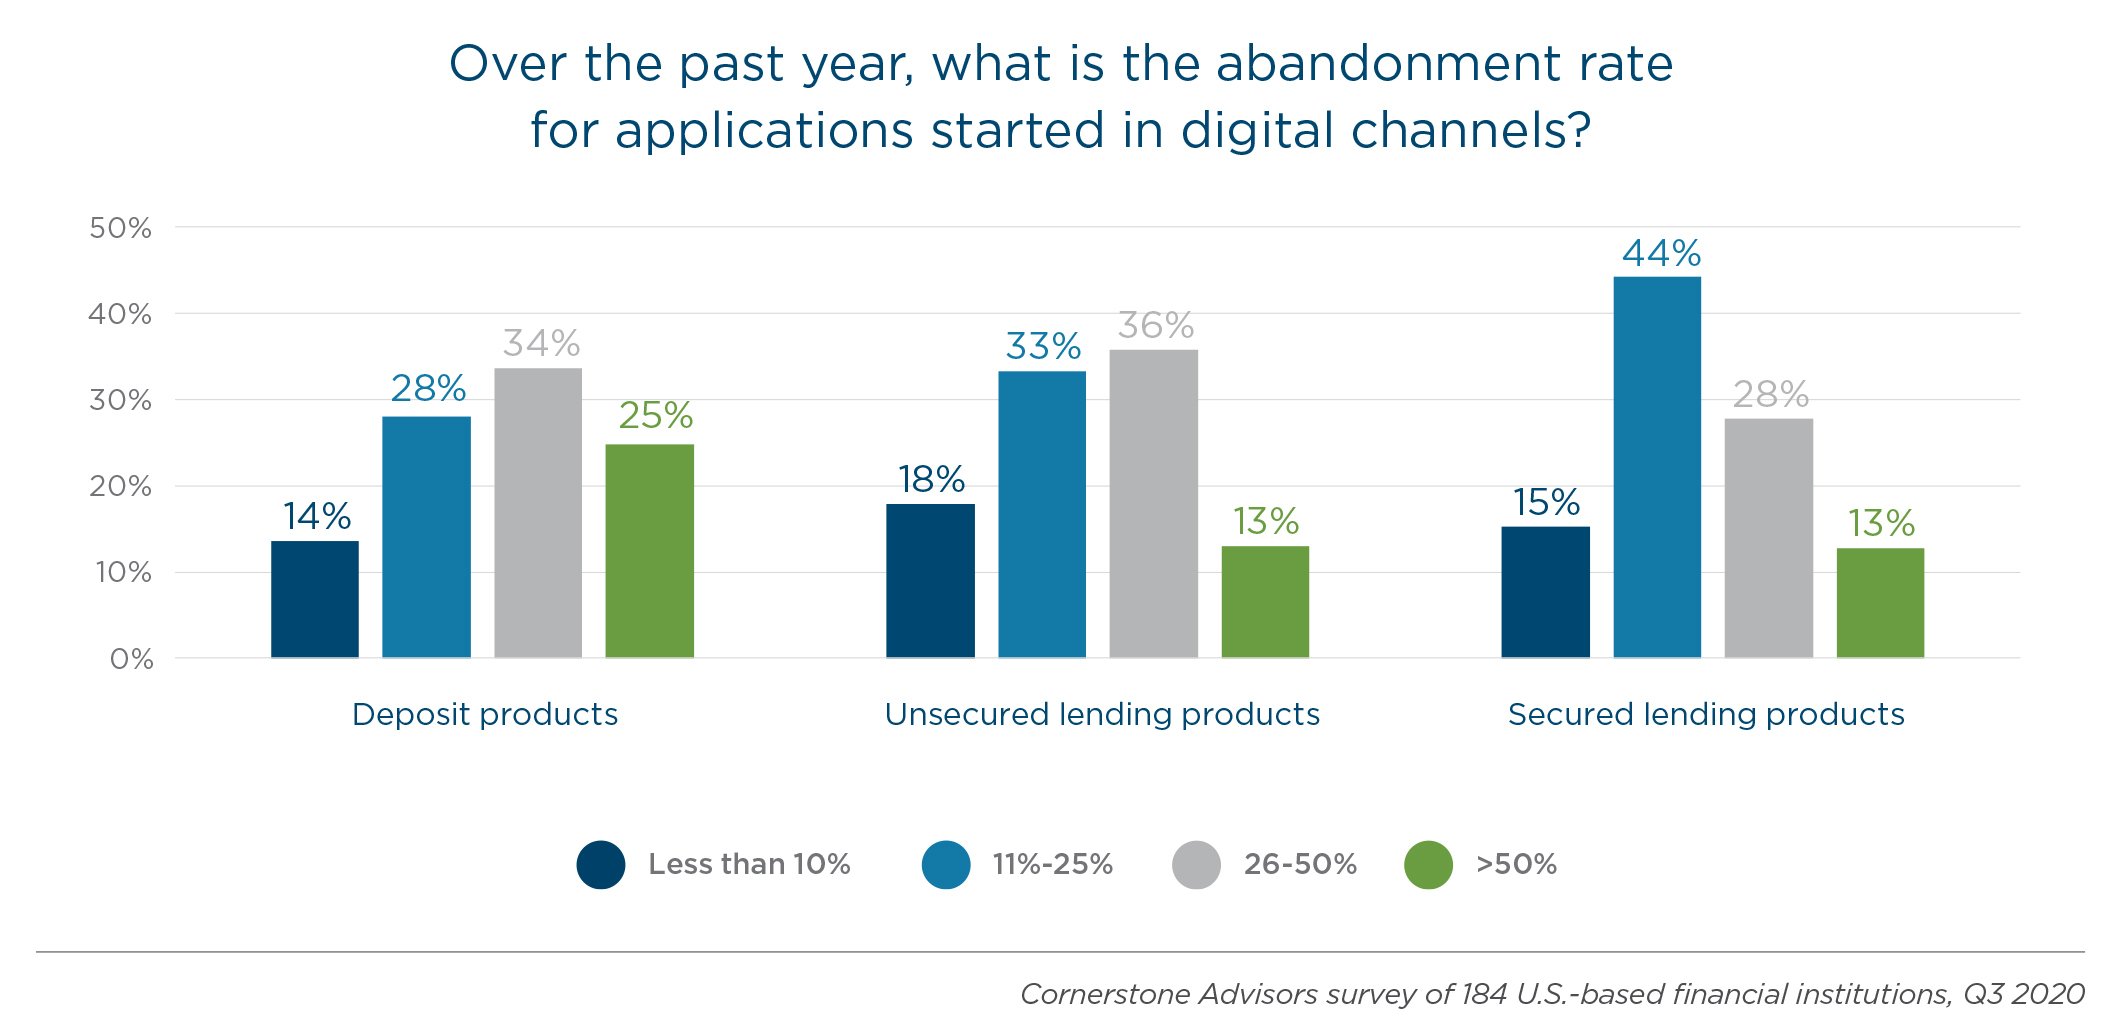 Abandonment Rate for applications started in digital channels